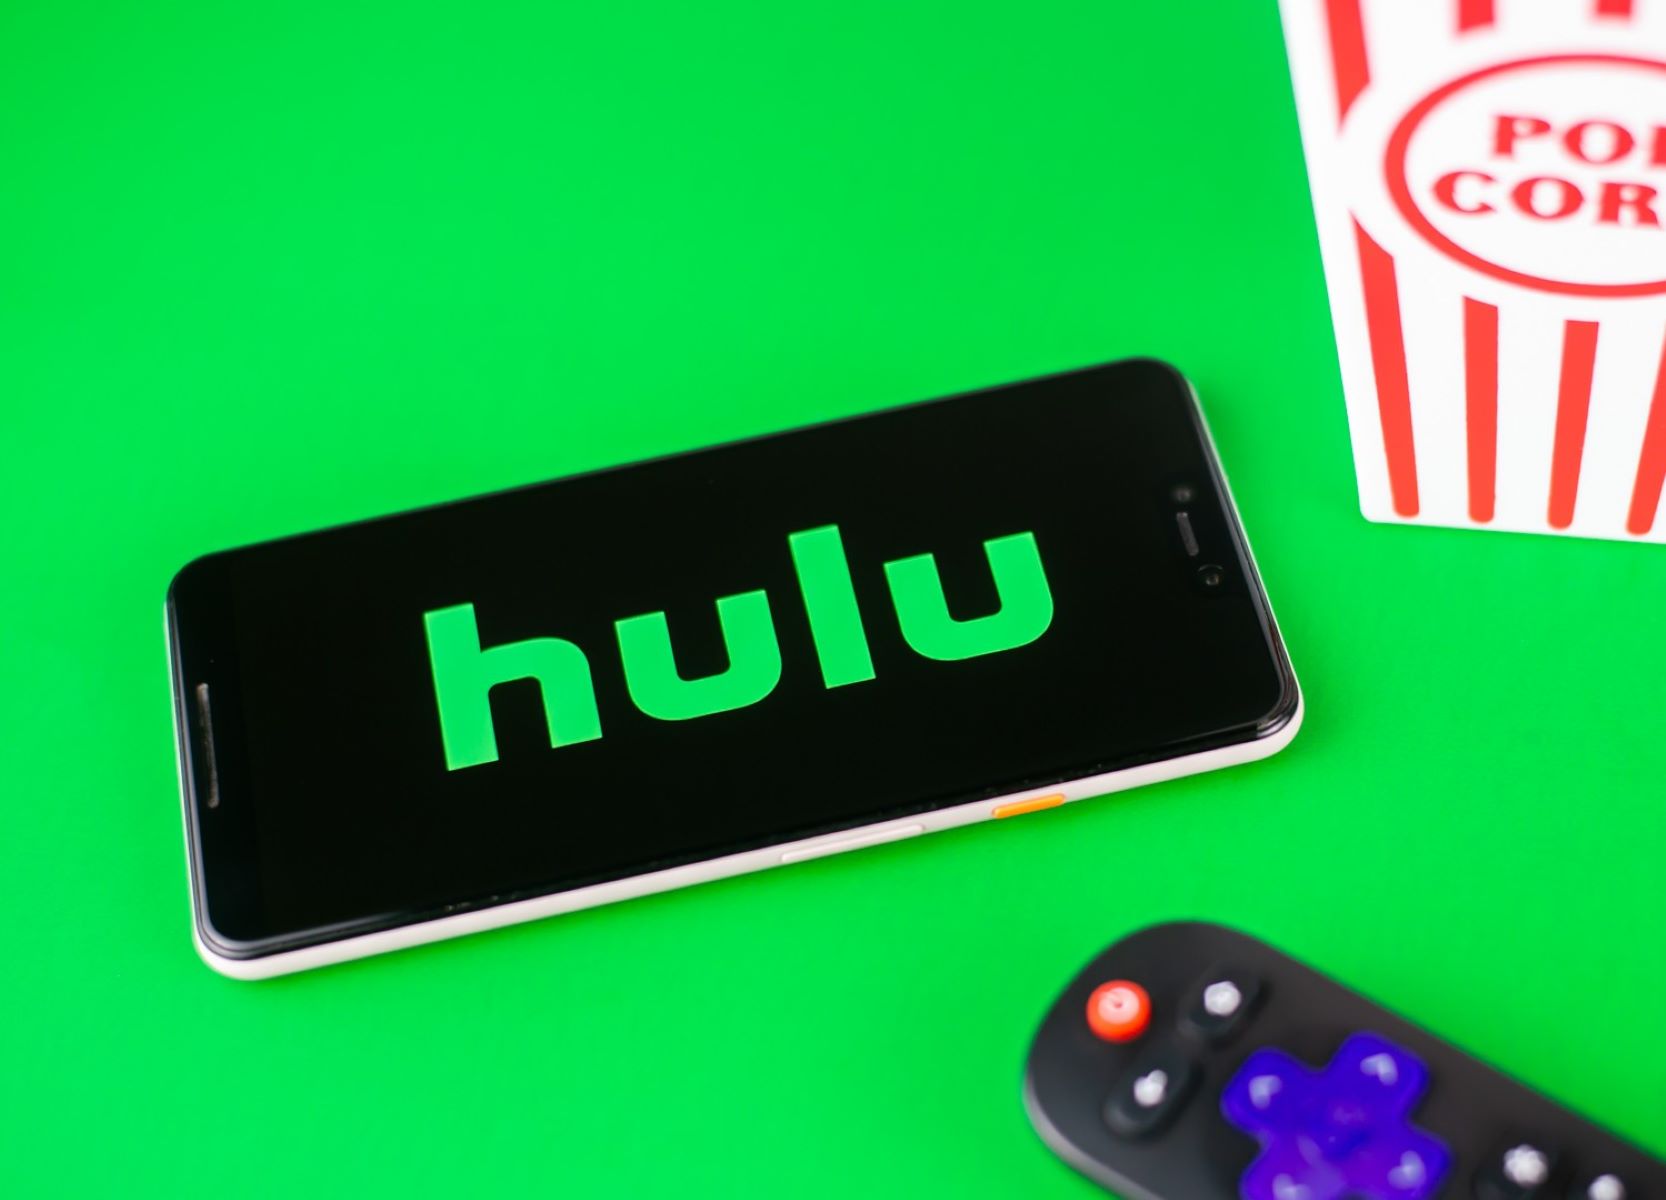 Fix Hulu Error Code P-dev340 With These Simple Steps